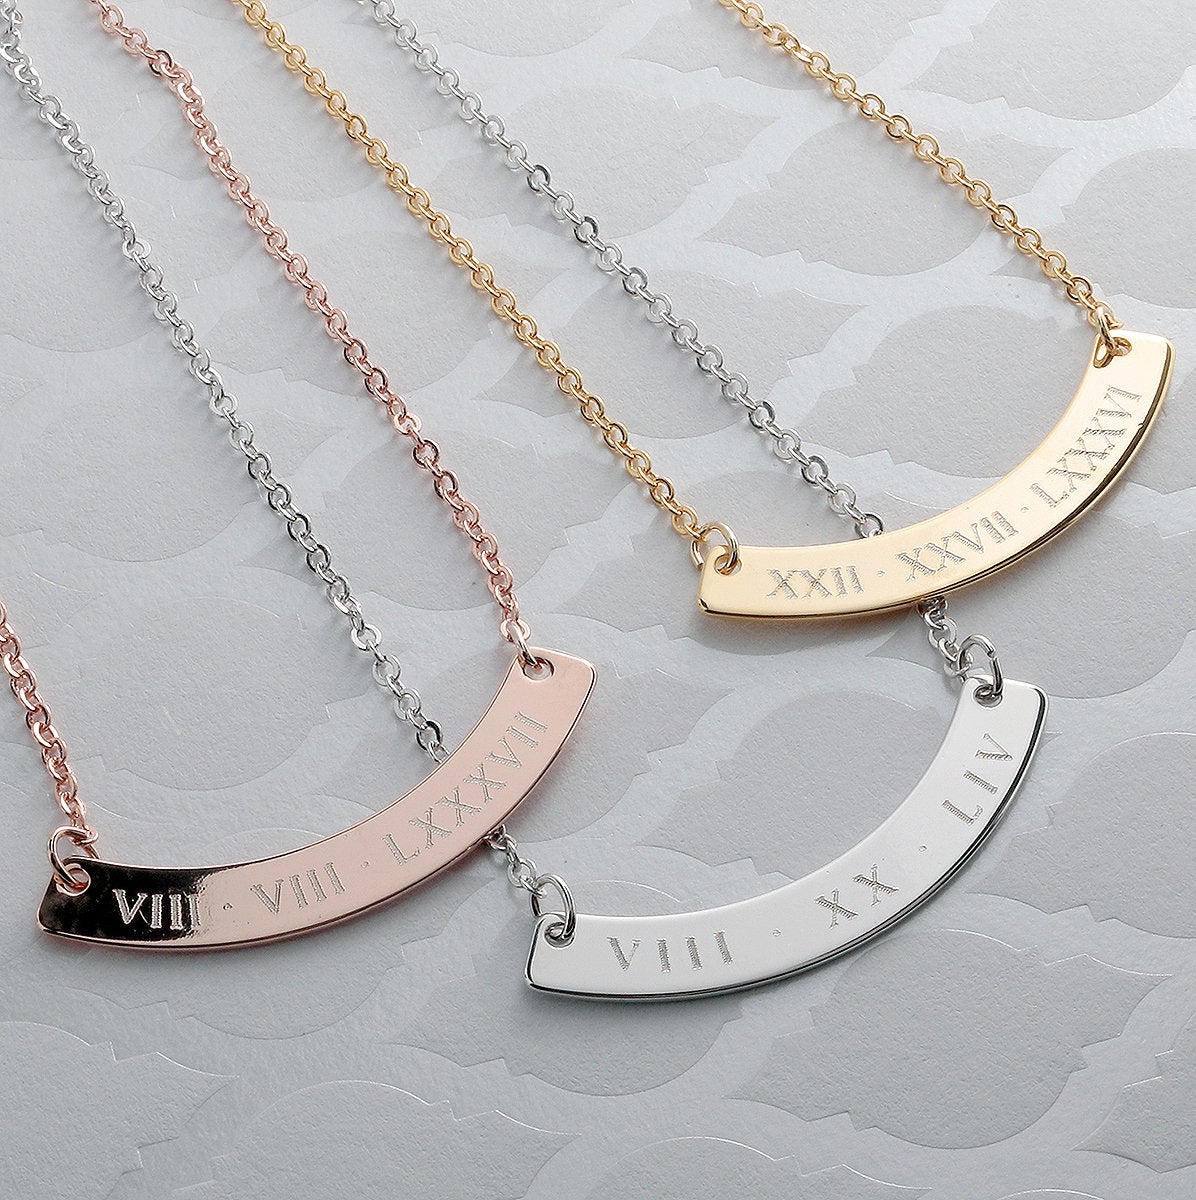 Personalized Curved Bar Necklace - 16k Gold plated